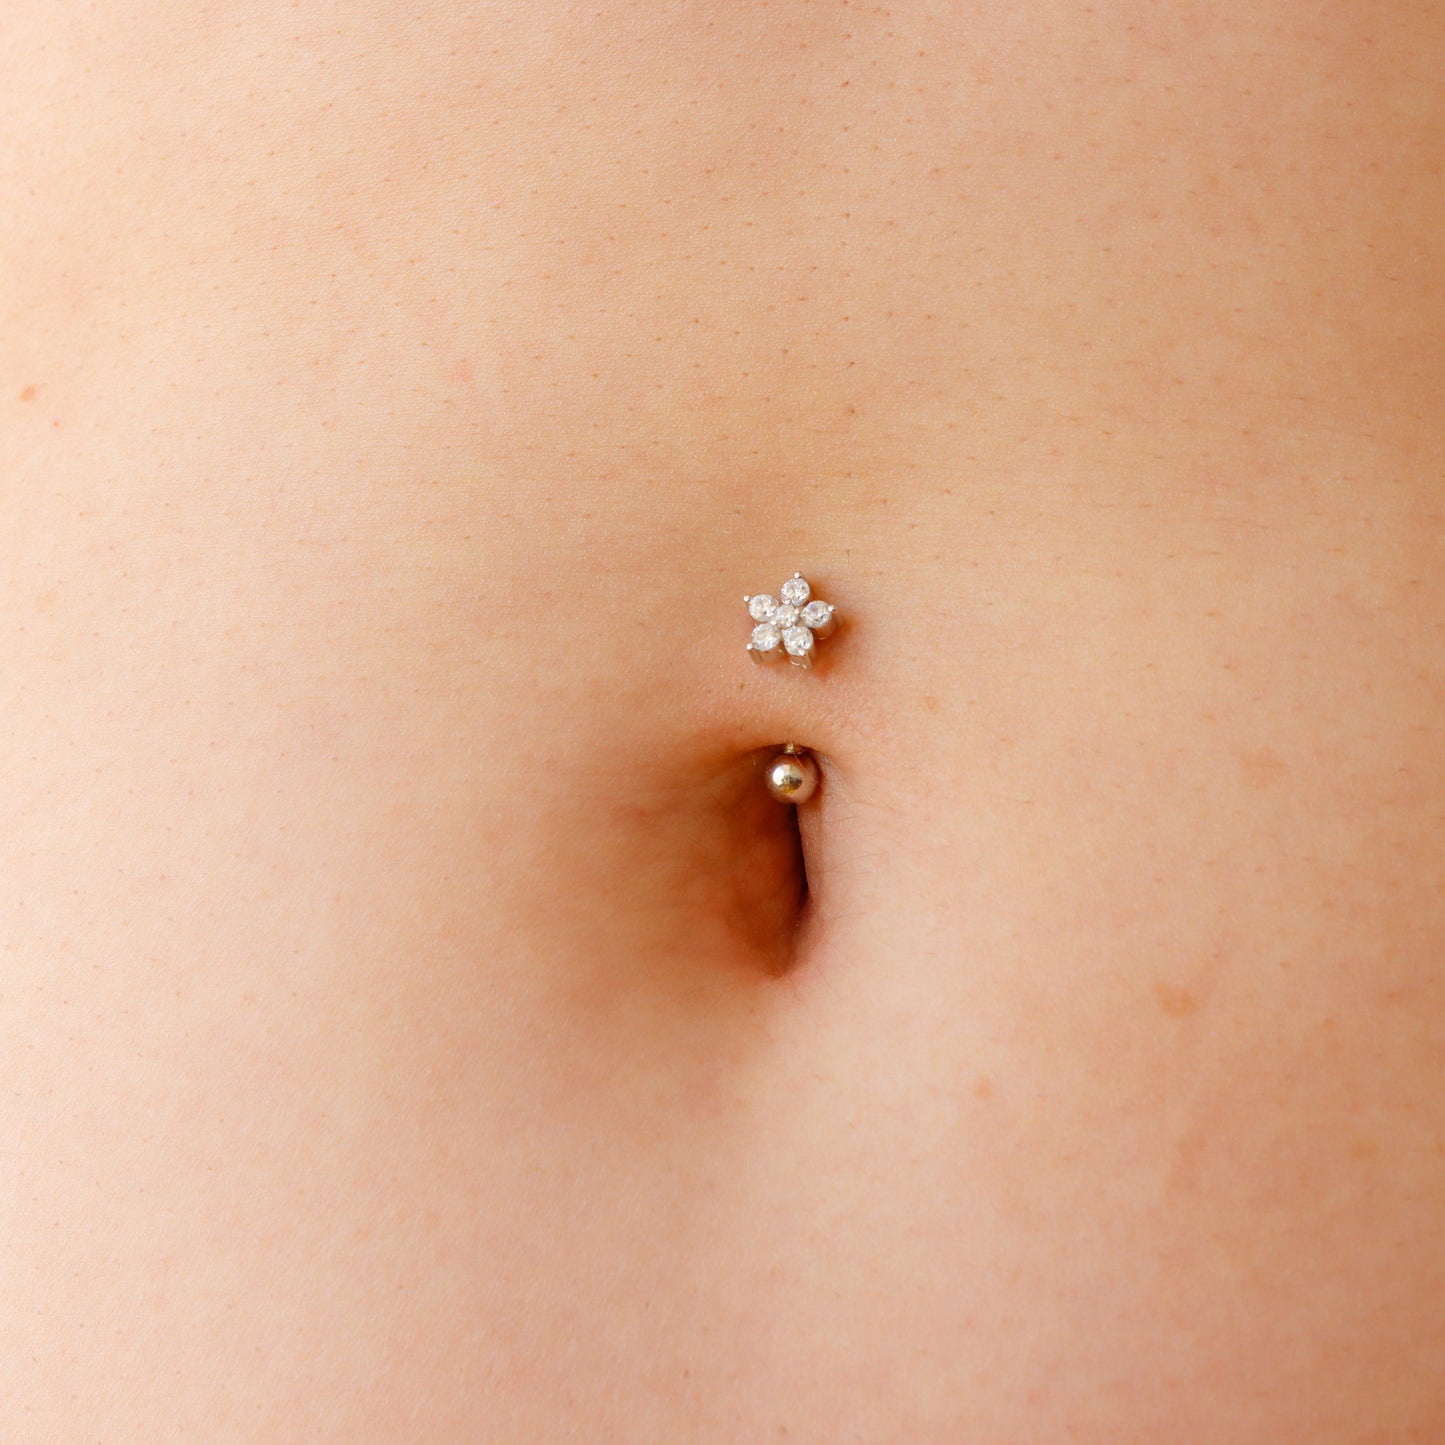 Solid 925 Silver | 16G 14G Petite Flower Reverse Belly Ring | 6mm 1/4" 8mm 5/16" 10mm 3/8" 12mm 15/32" - Sturdy South